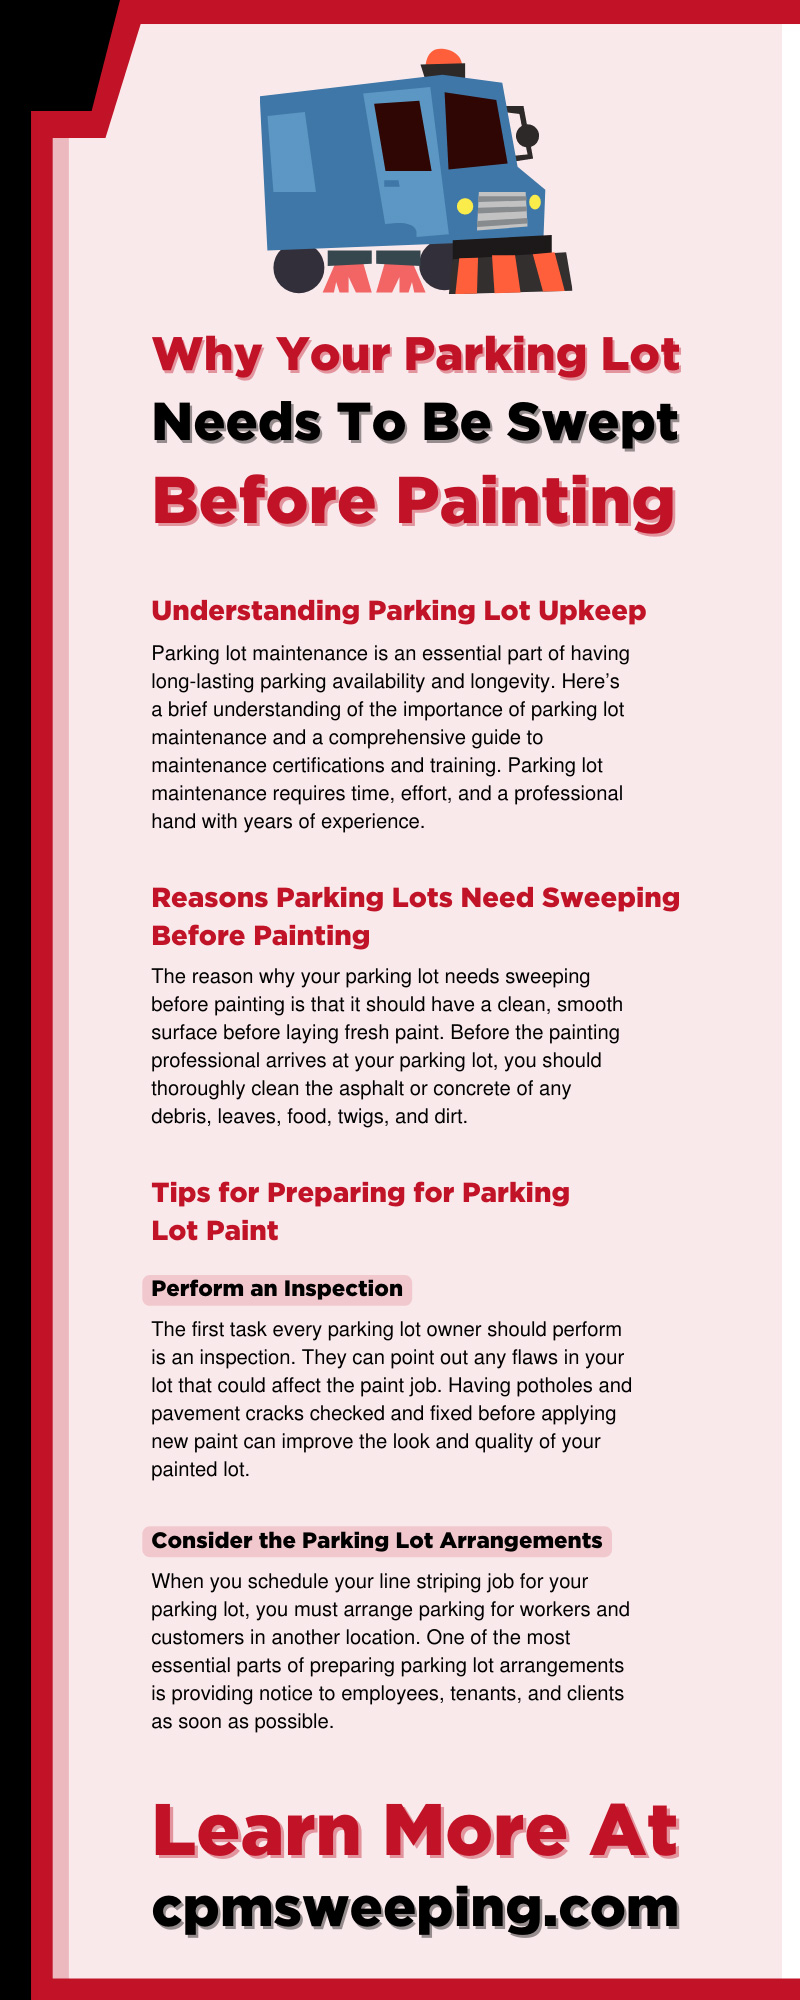 Why Your Parking Lot Needs To Be Swept Before Painting